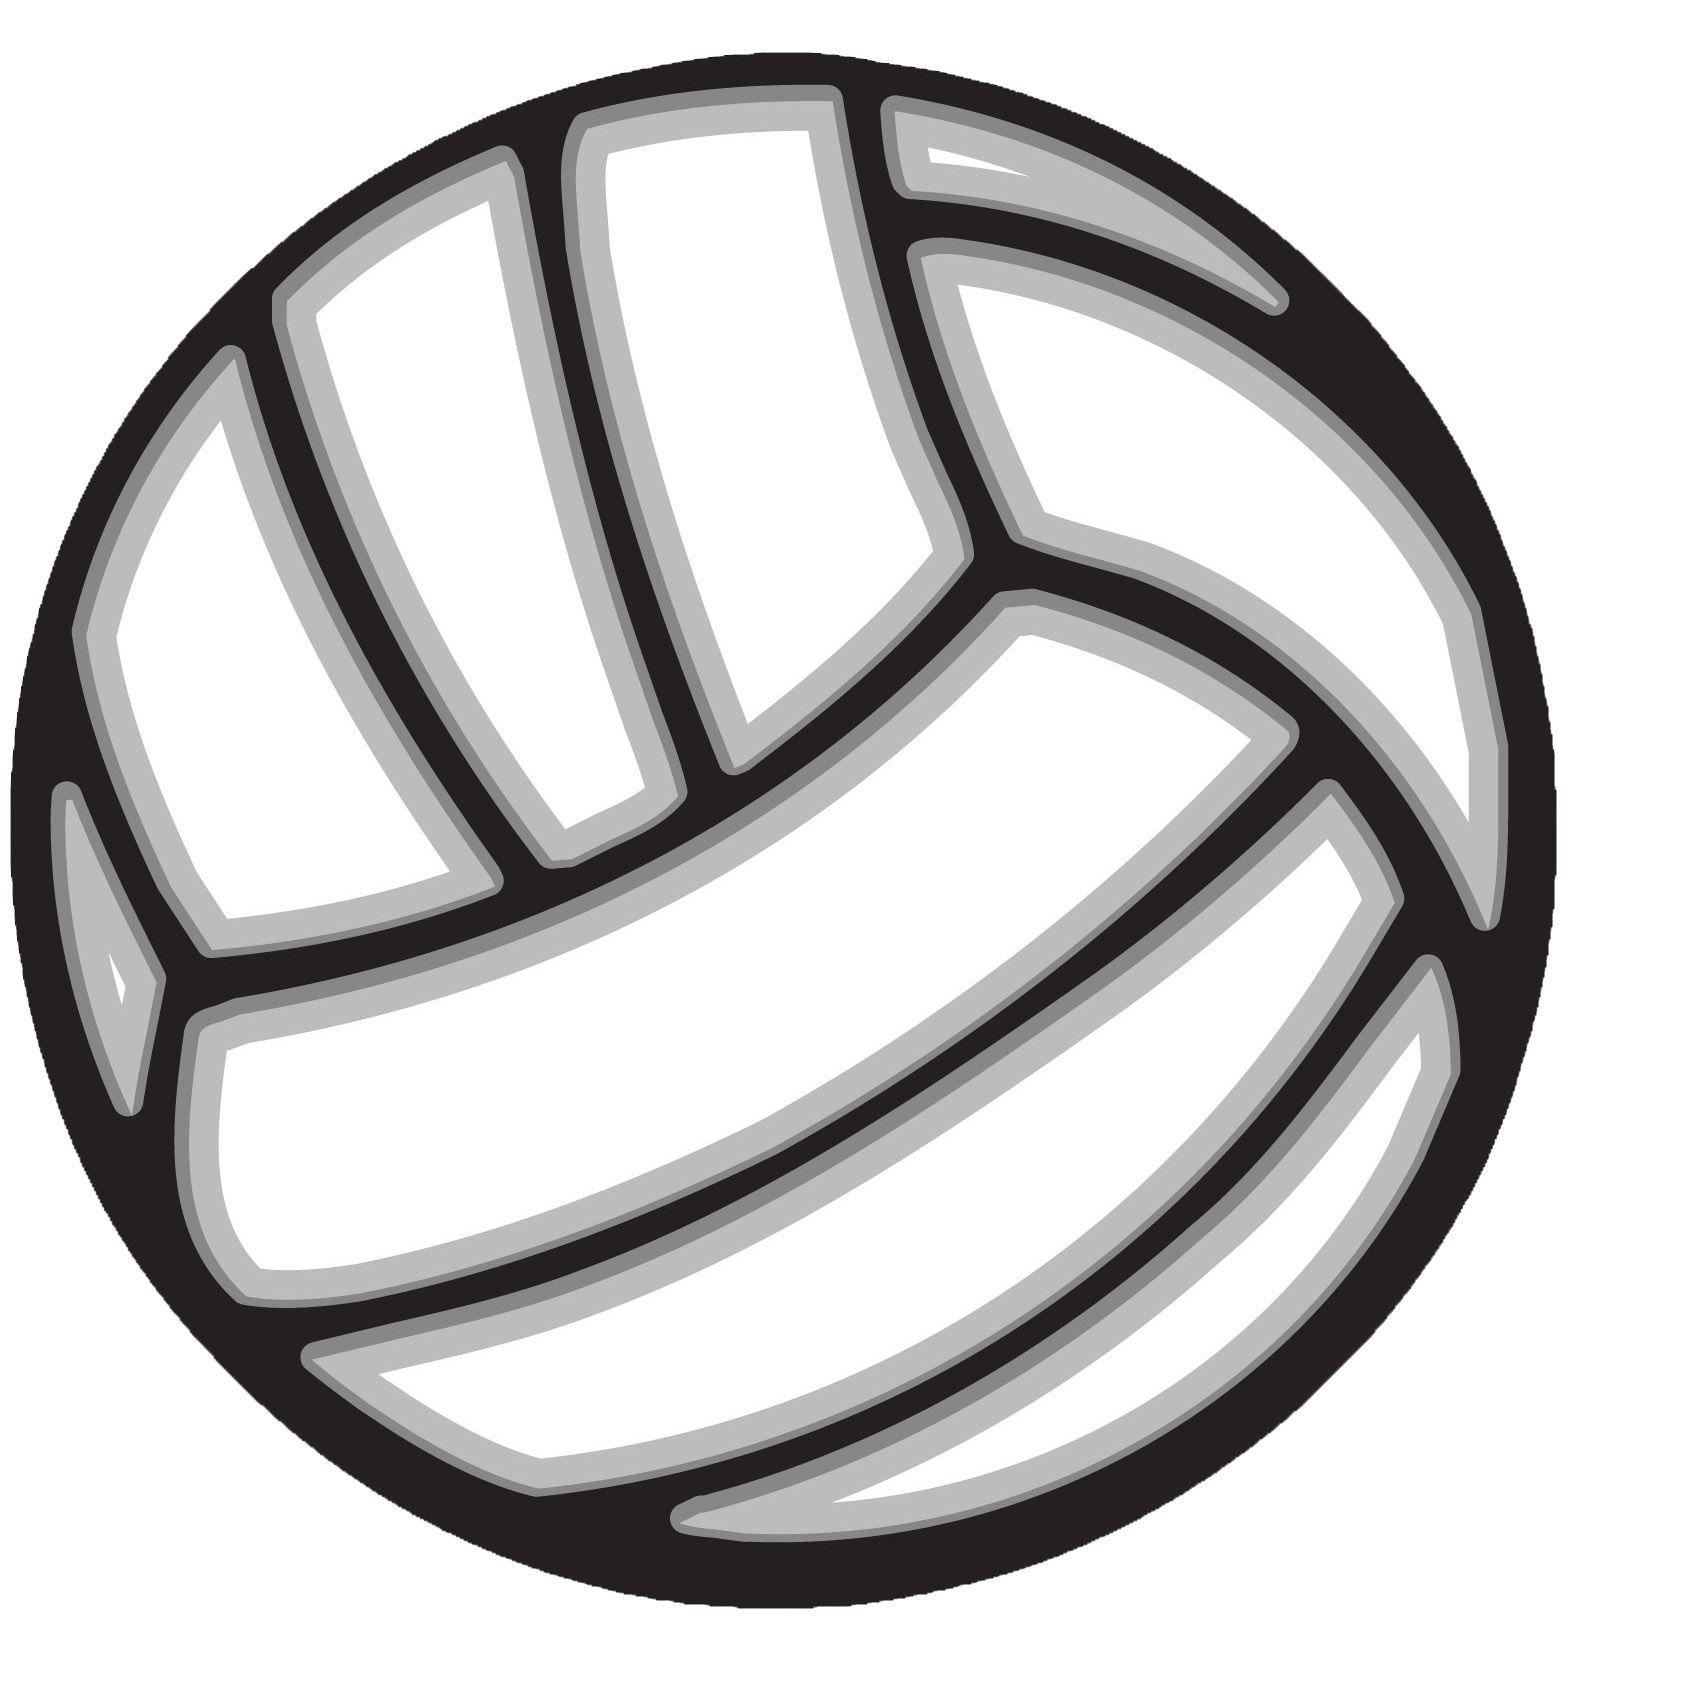 Hawks Volleyball Logo - All Players